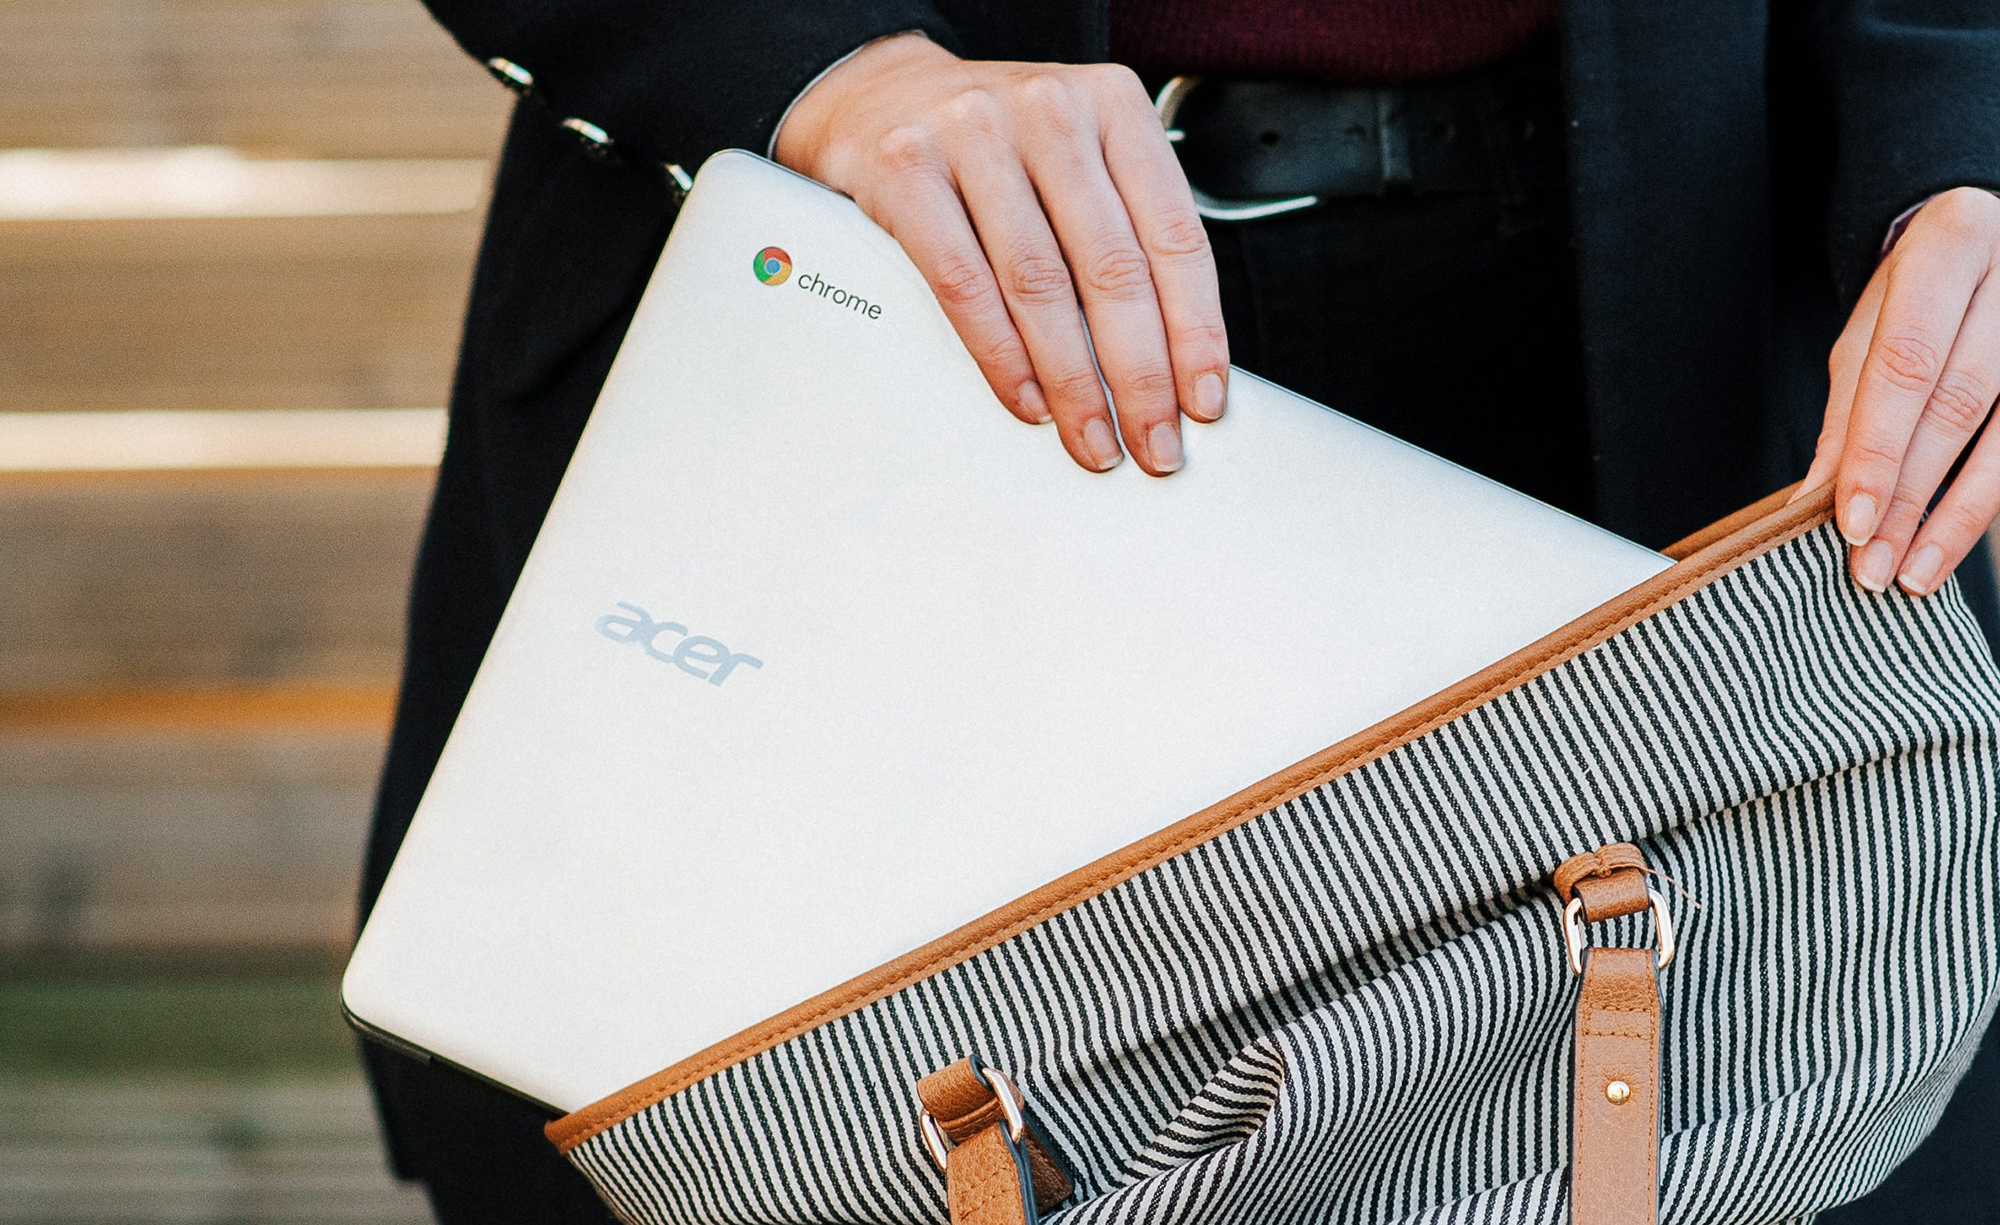 You should back up your Chromebook. Here’s how.